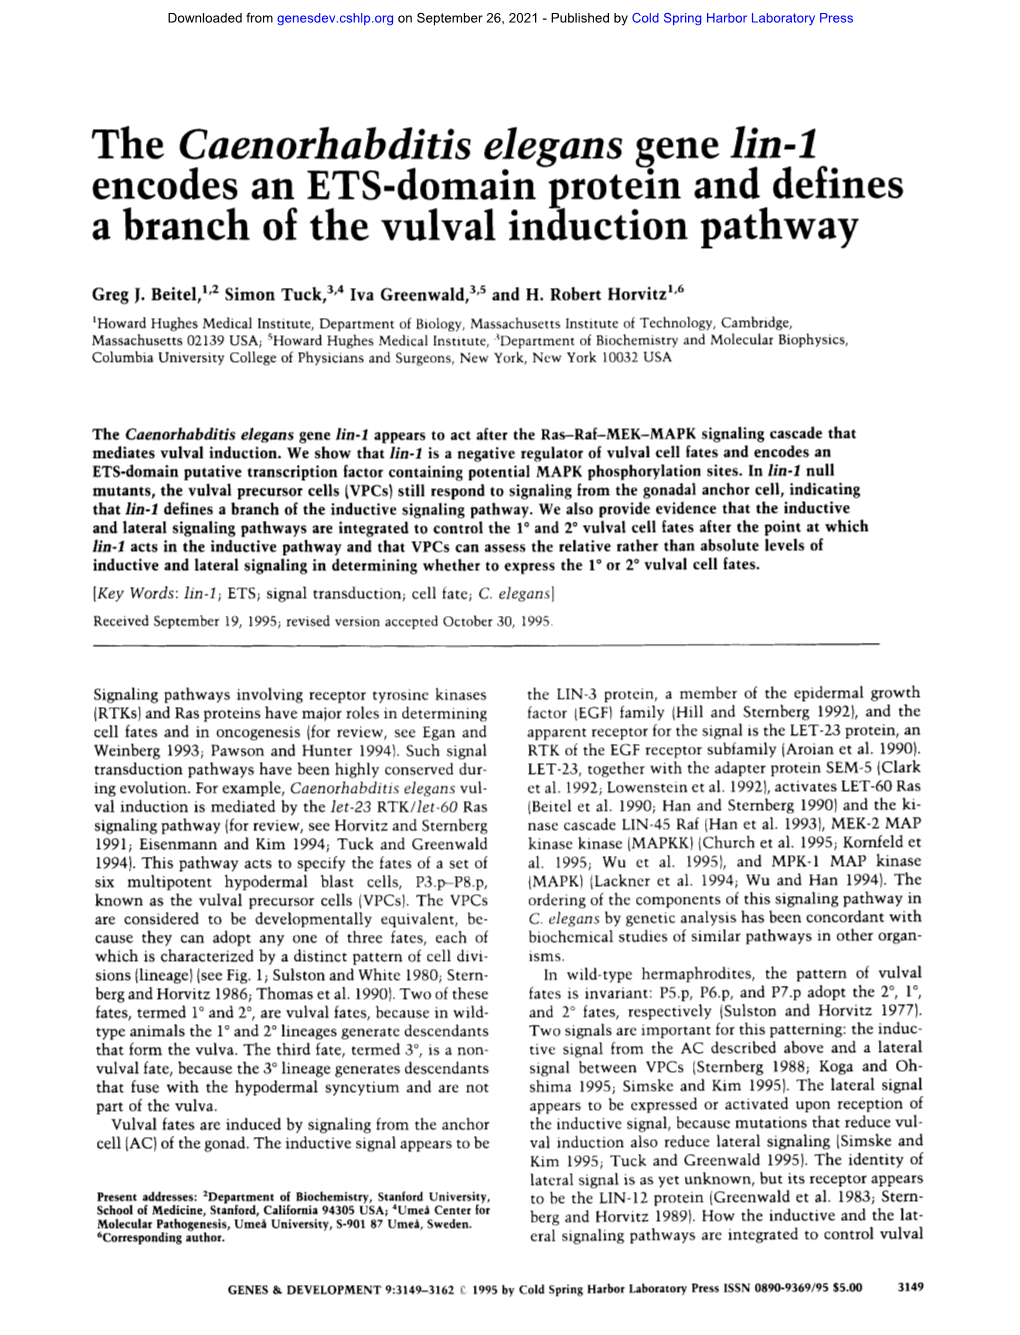 The Caenorhabditis Elegans Gene Lin-1 Encodes an ETS-Domai.N Protein and Defines a Branch of the Vulval Induction Pathway